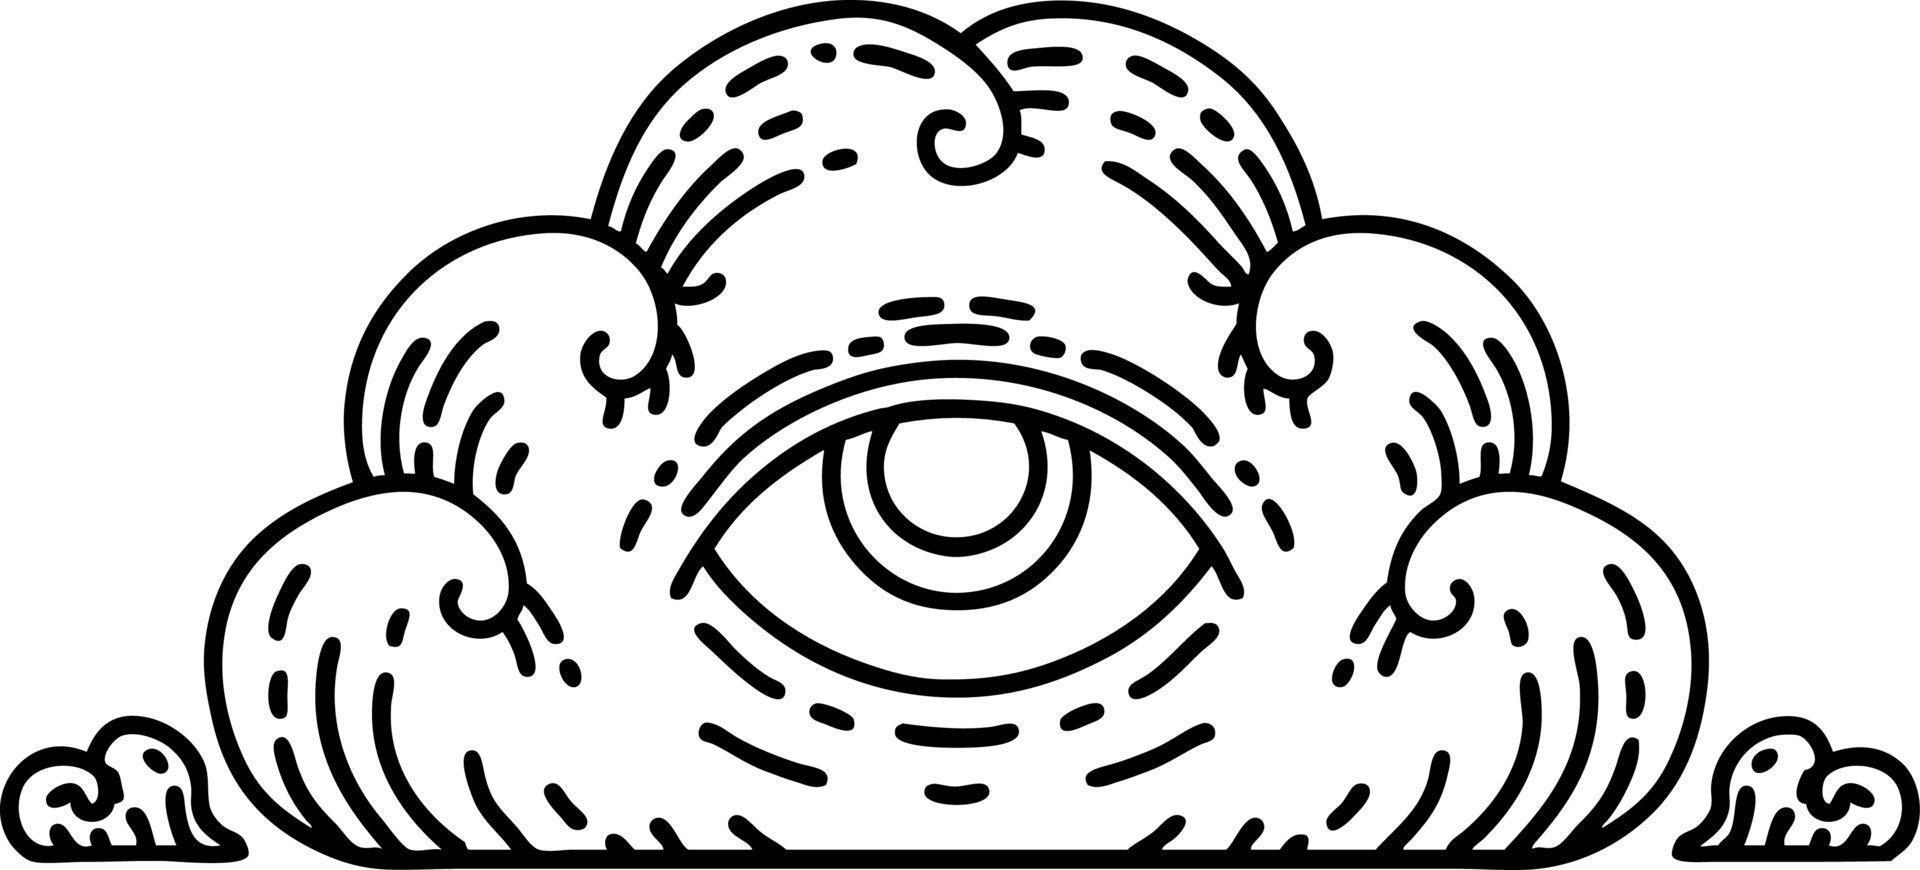 tattoo in black line style of an all seeing eye cloud vector